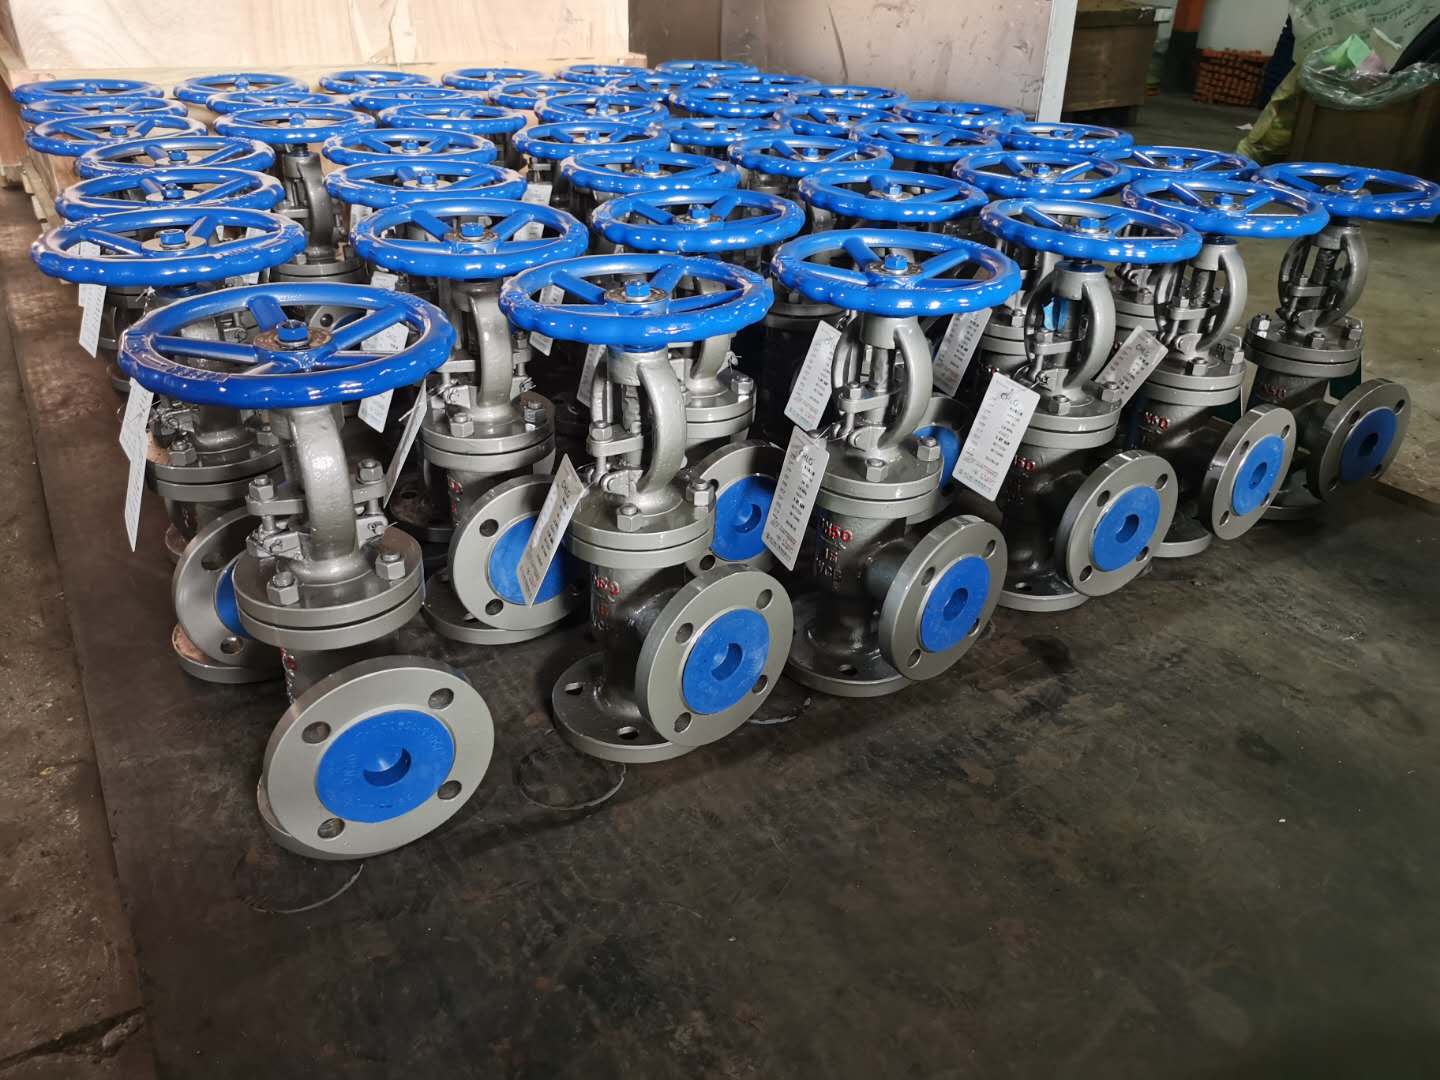 How does the globe valve work? Valve tips: Teach you to identify the quality of butterfly valve and common globe valve types